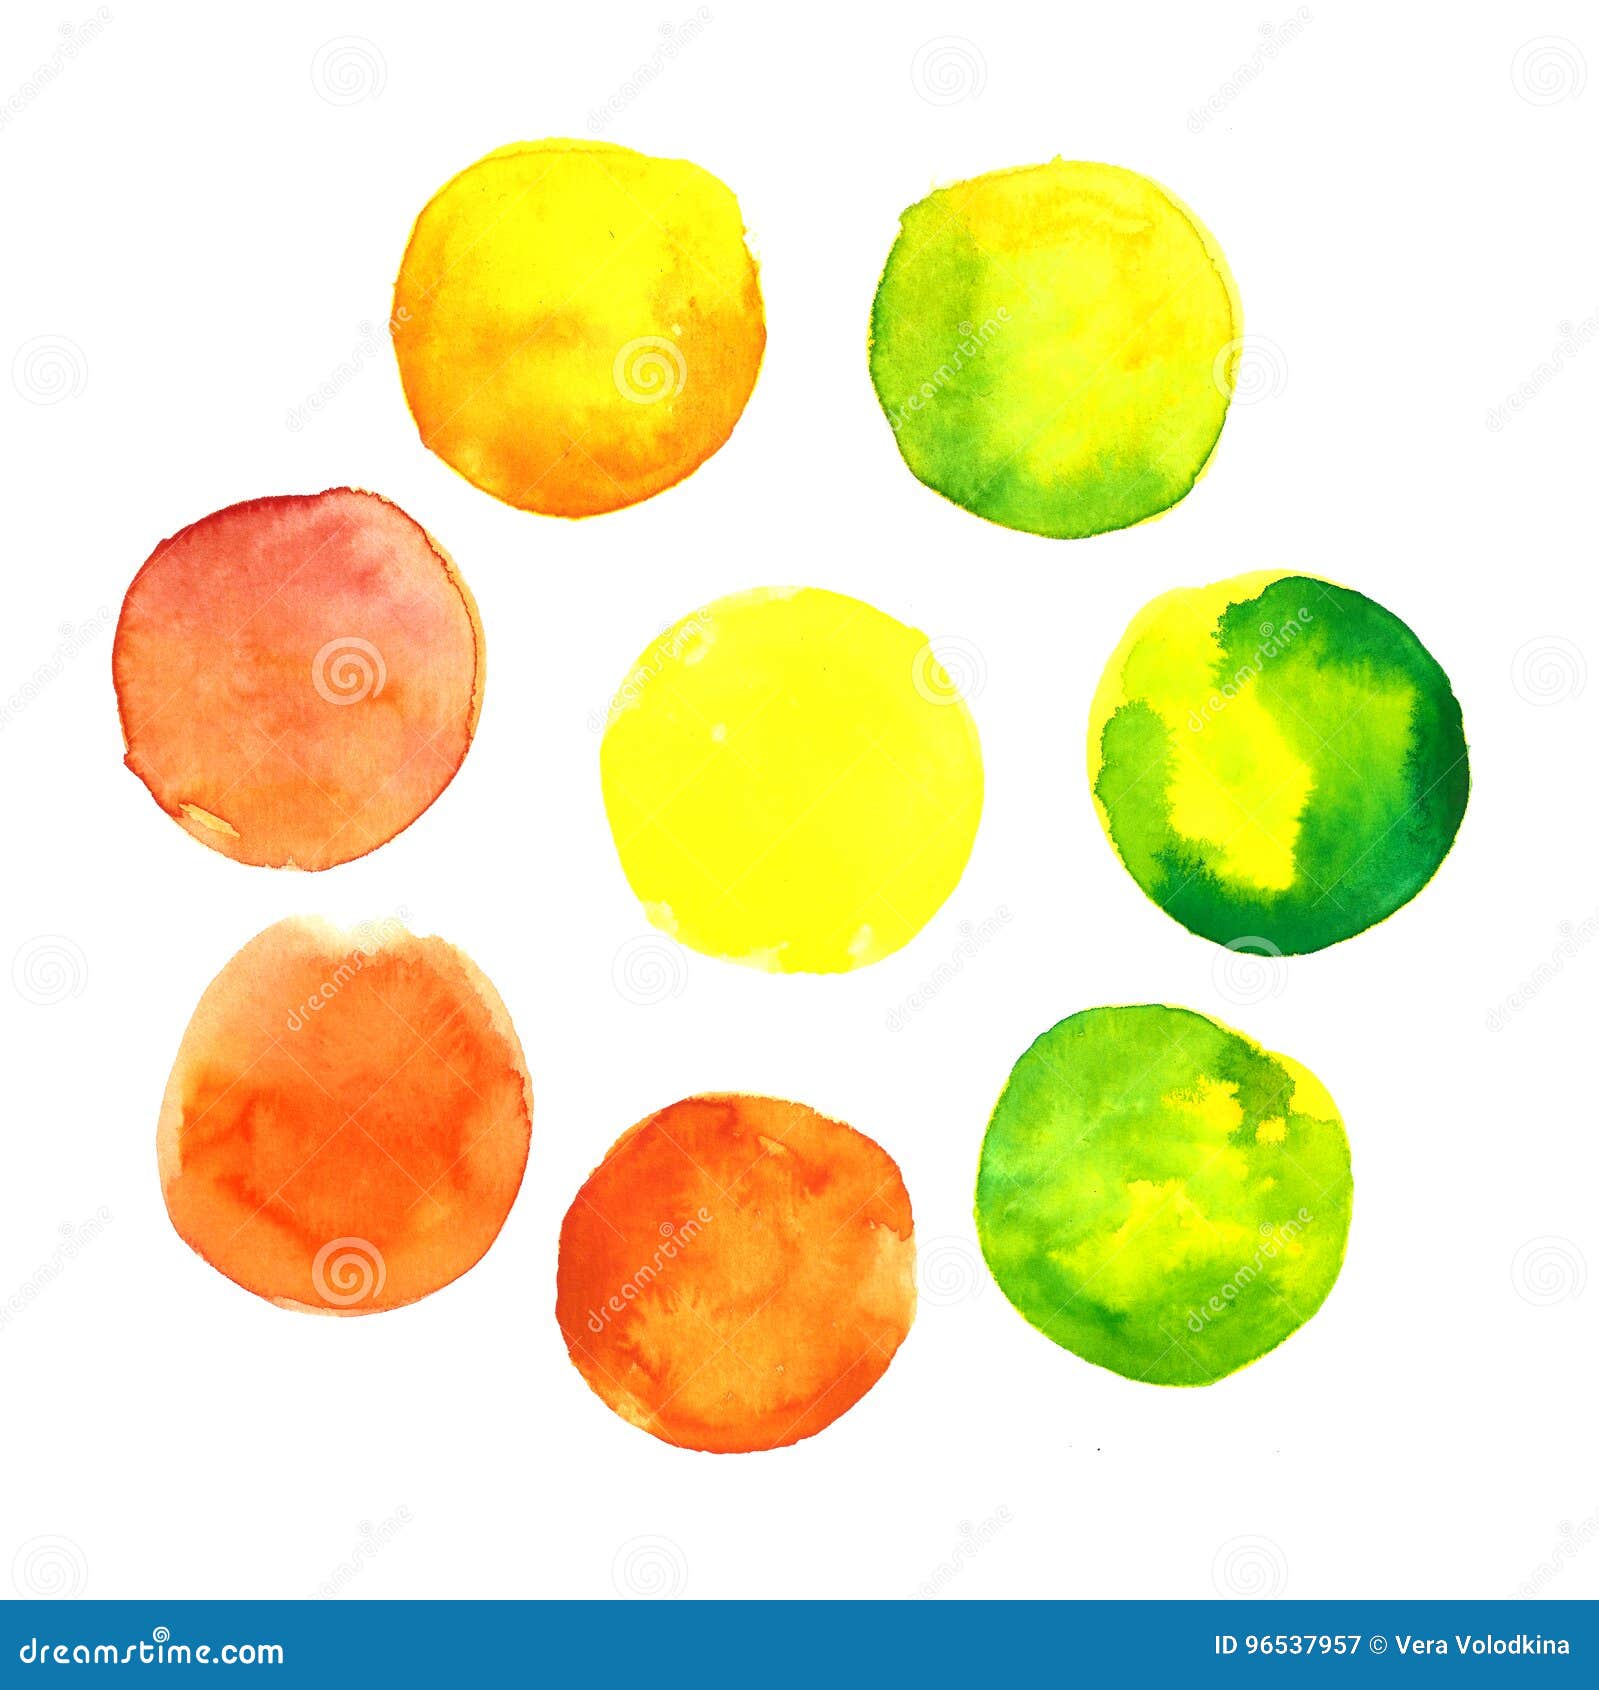 Set of colorful yellow, orange and green hand drawn watercolor spots, circles isolated on white background.